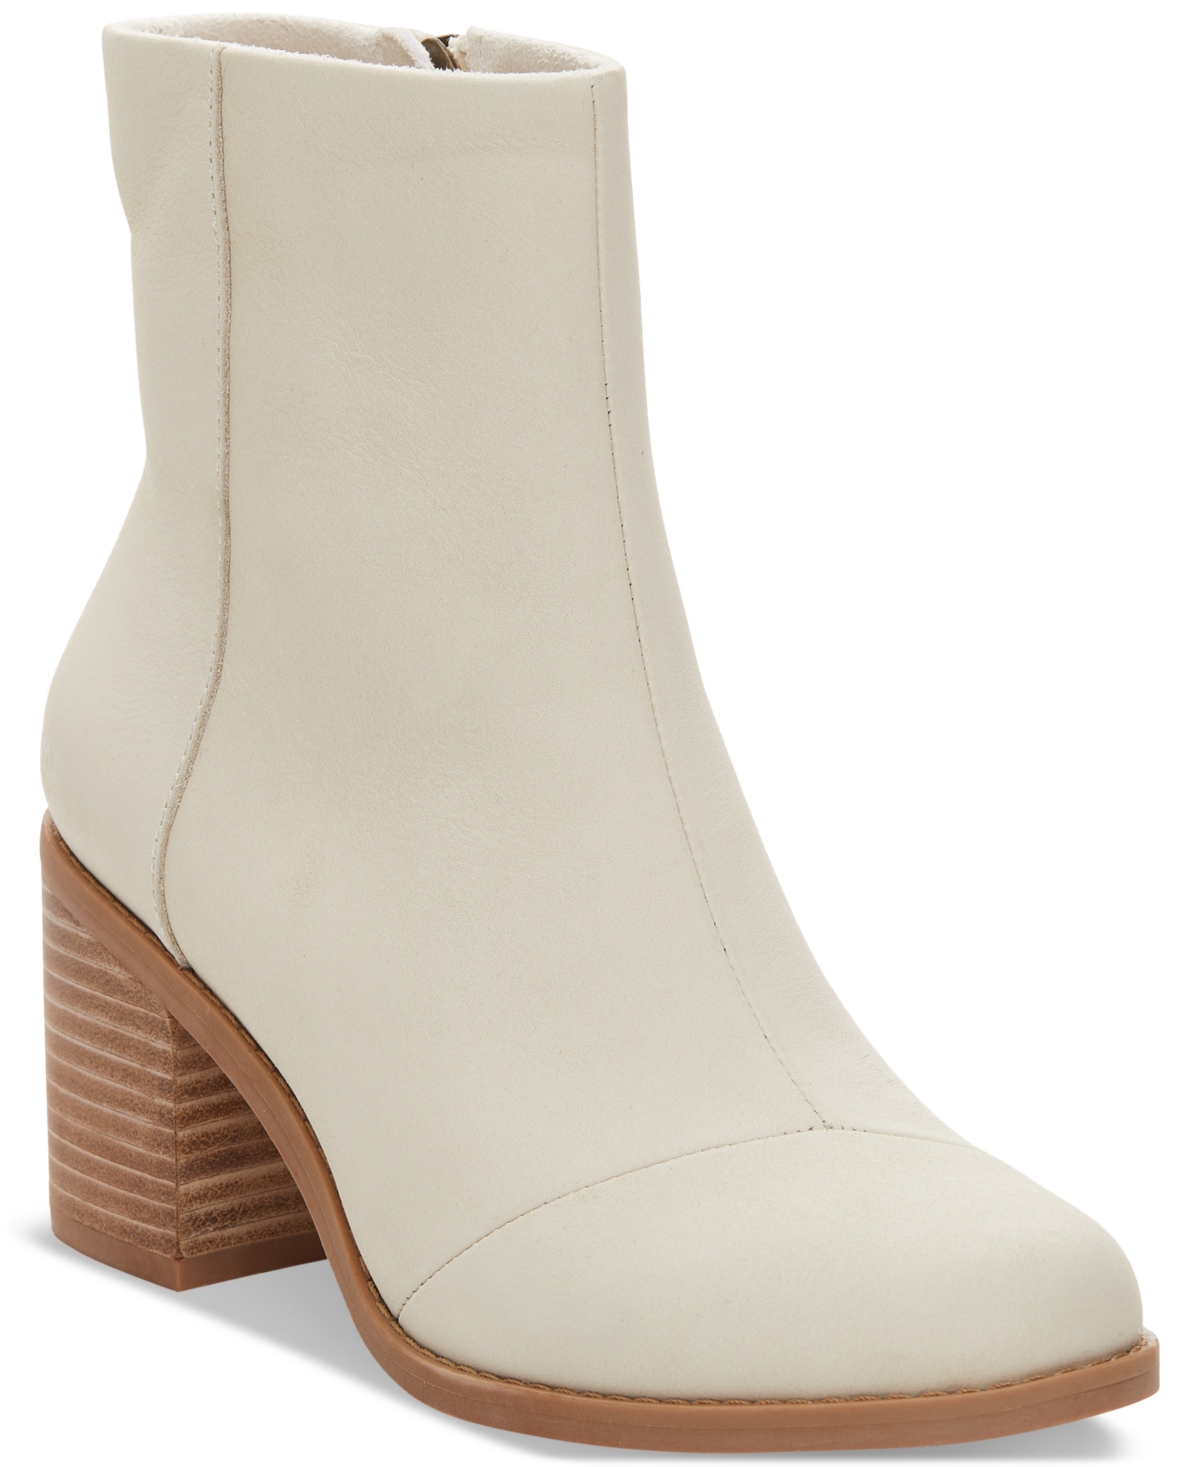 Women's Evelyn Stacked Block Heel Booties - Light Sand Leather